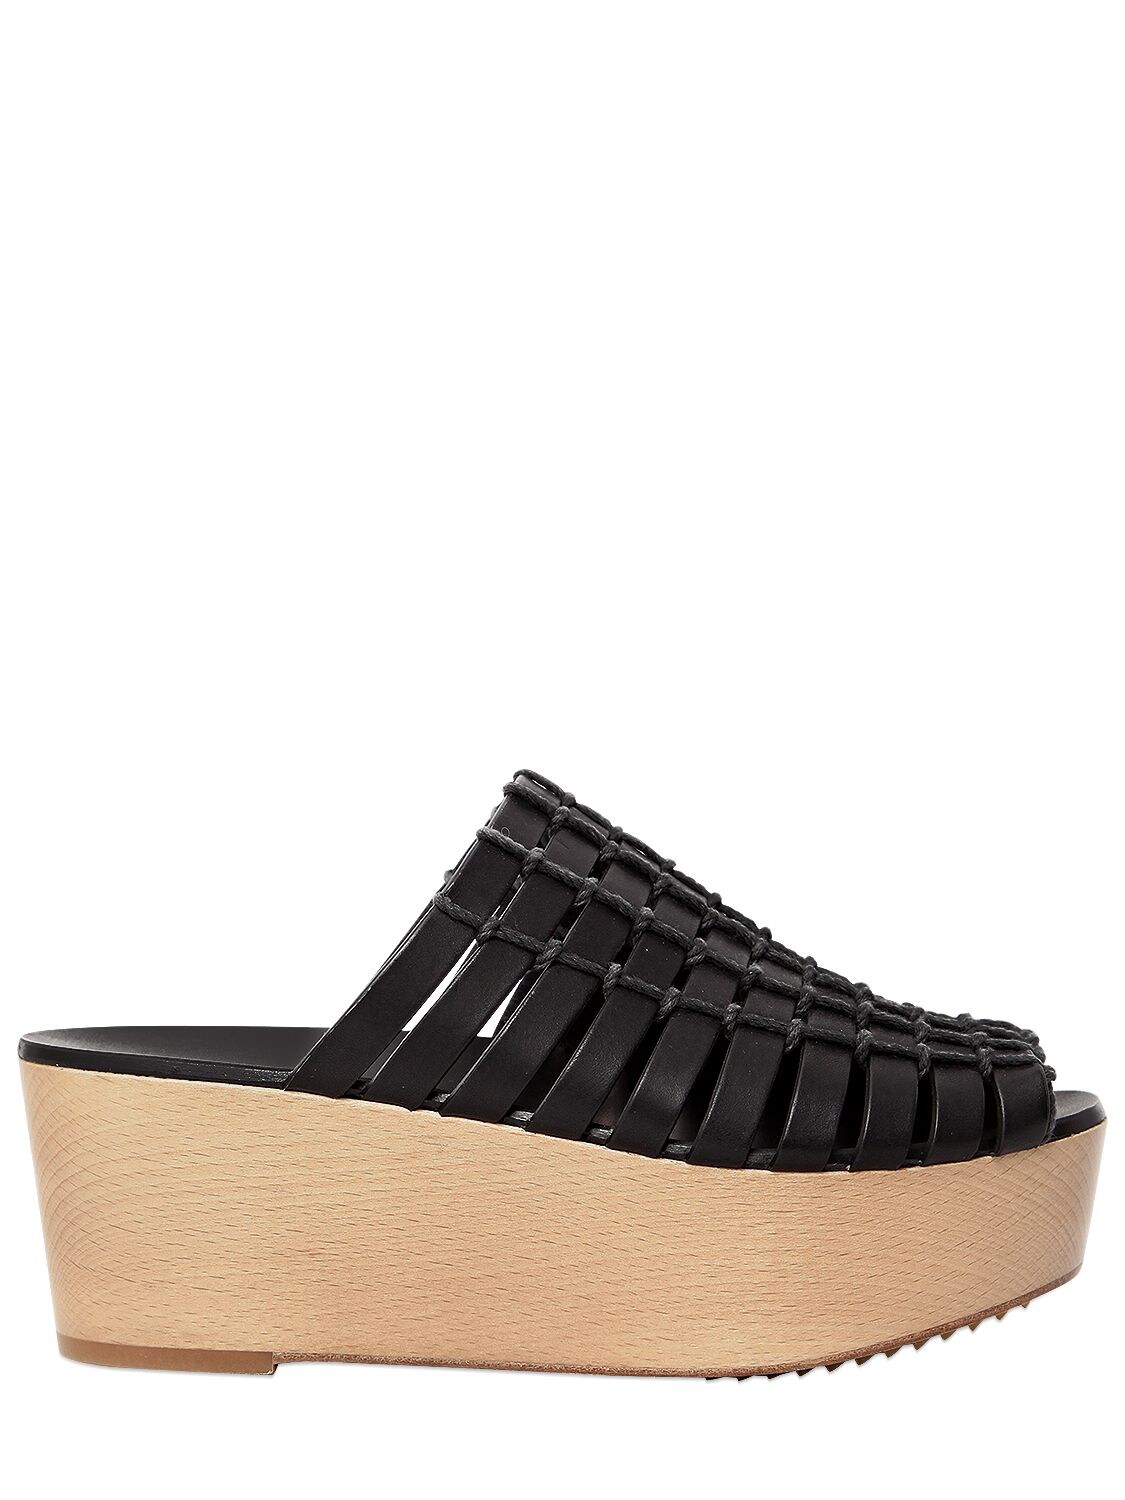 Rick Owens 70mm Country Leather Wedge Mules In Black